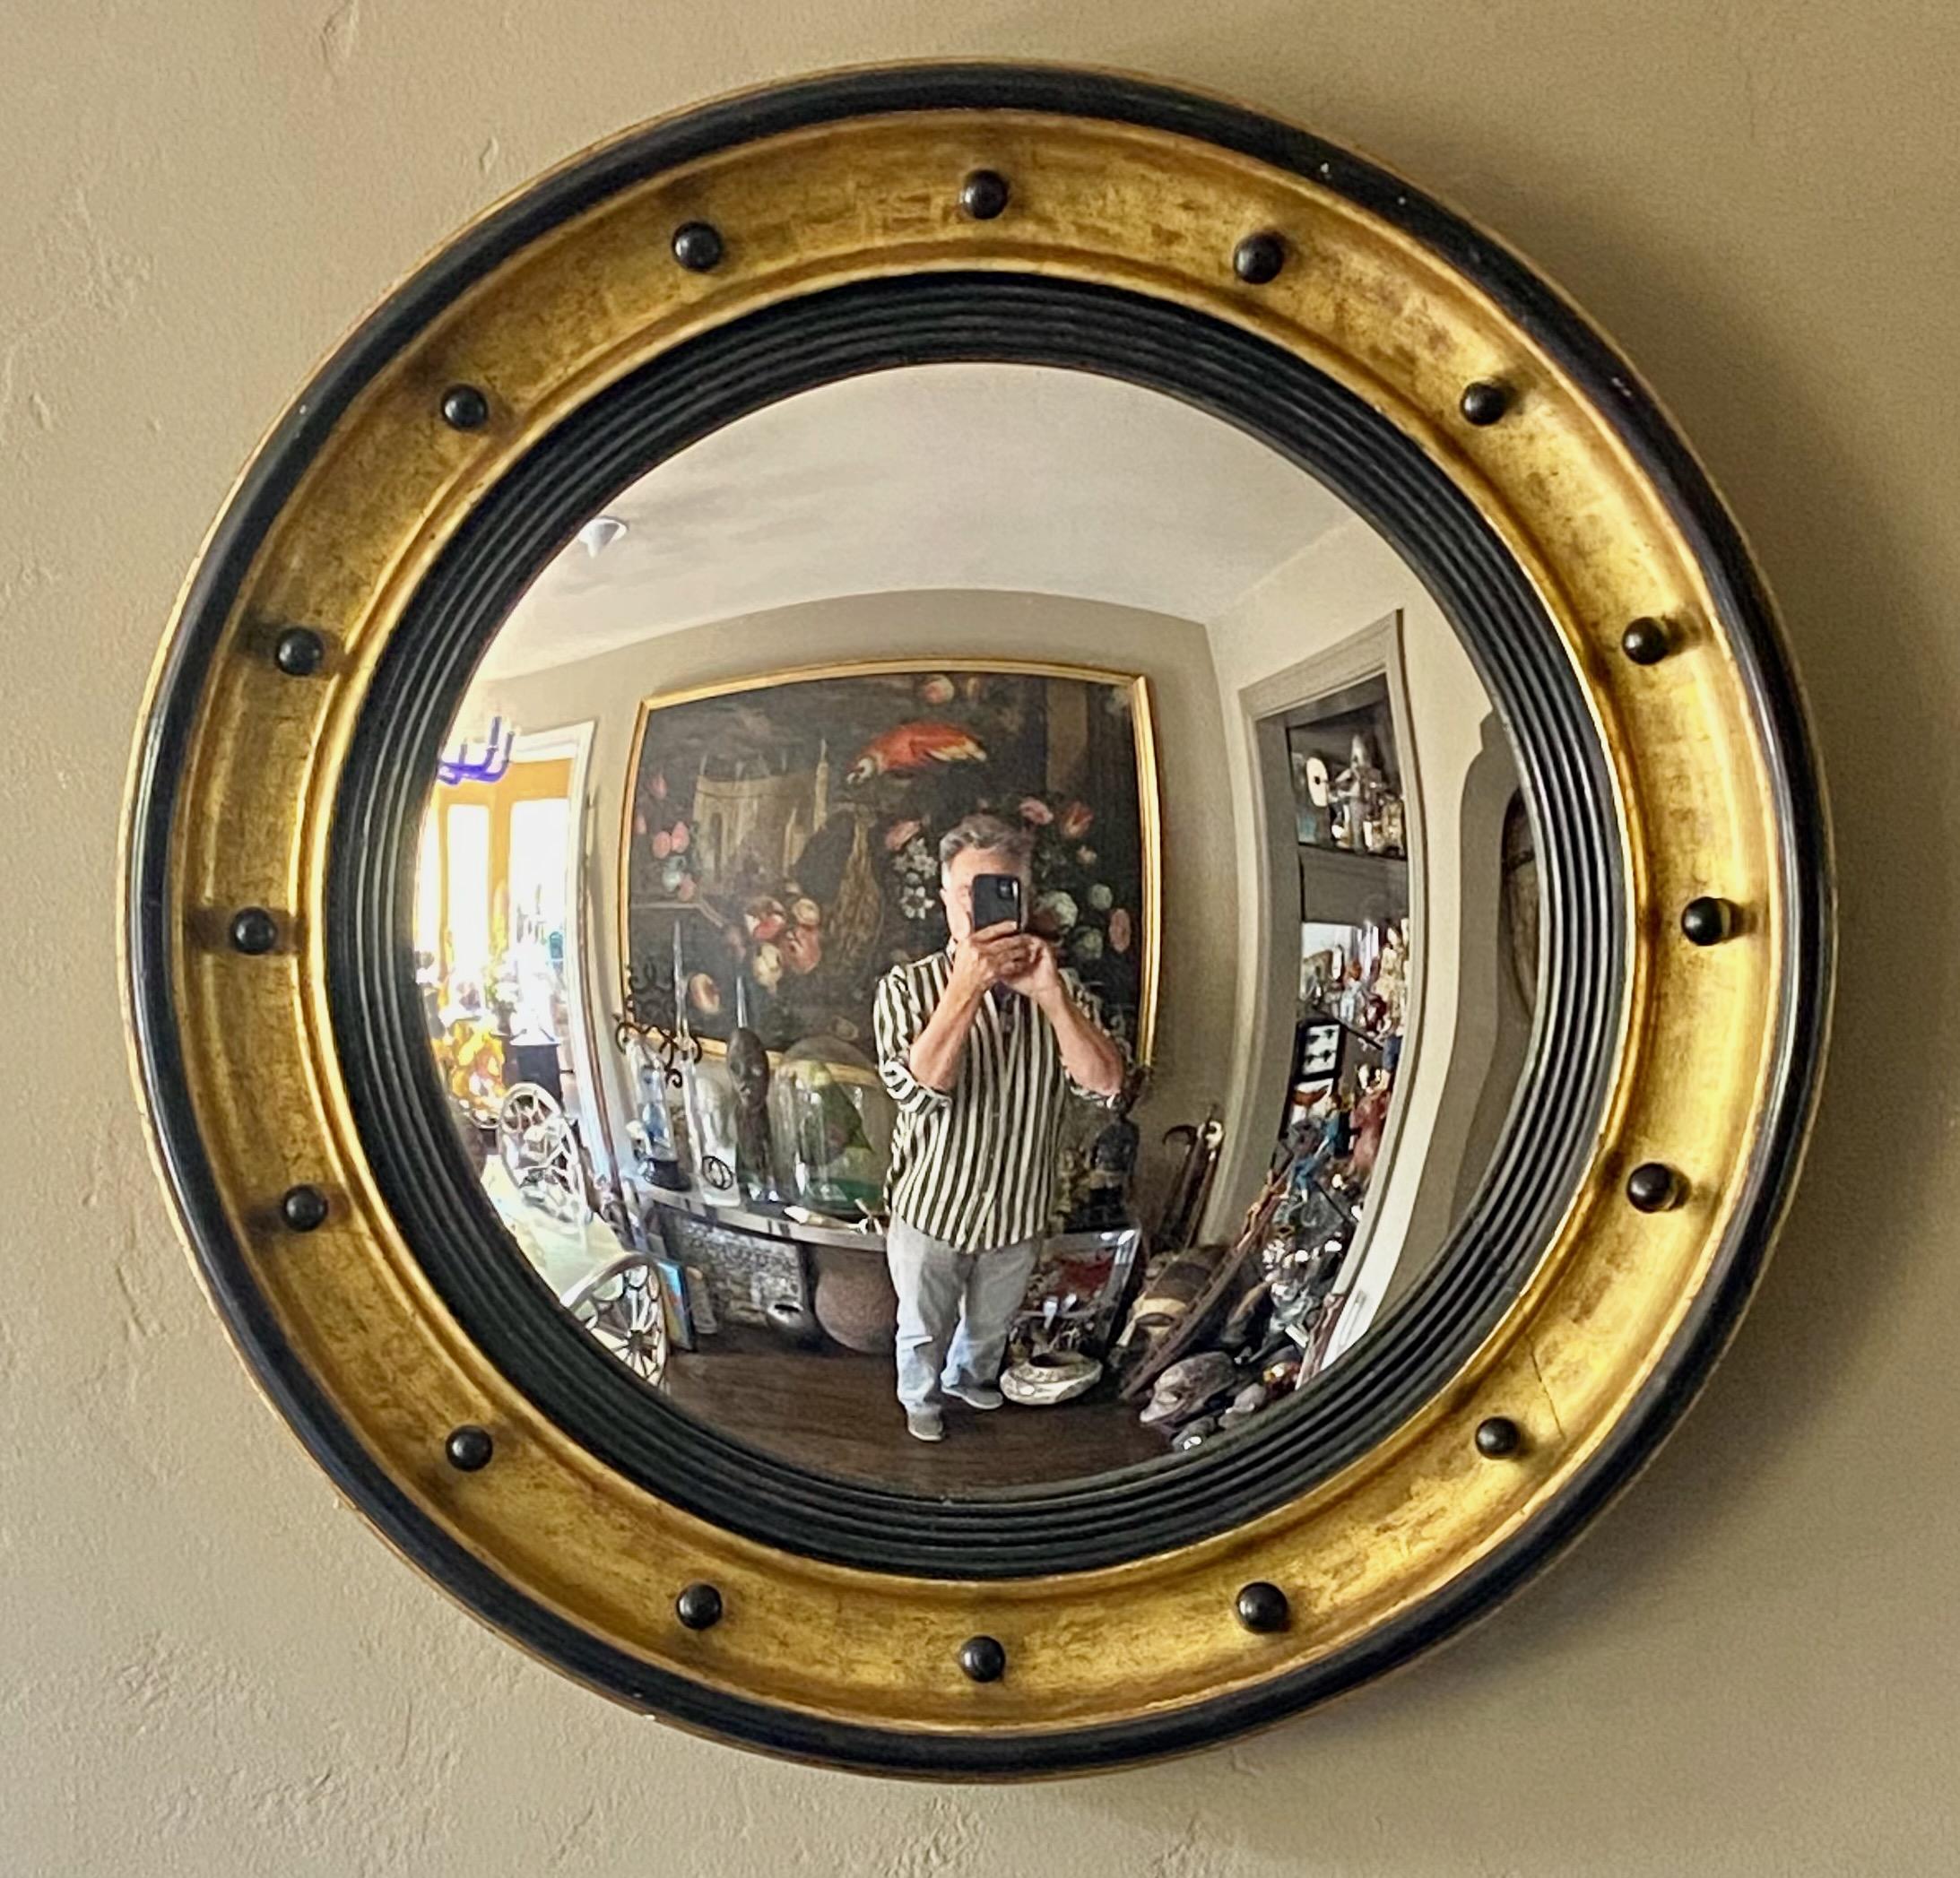 A large scale English Regency period gilt and lacquered convex mirror.
In remarkable antique condition. We believe this is completely original, 
having its original gilding, black lacquer and mirror.
England, Early 19th century.